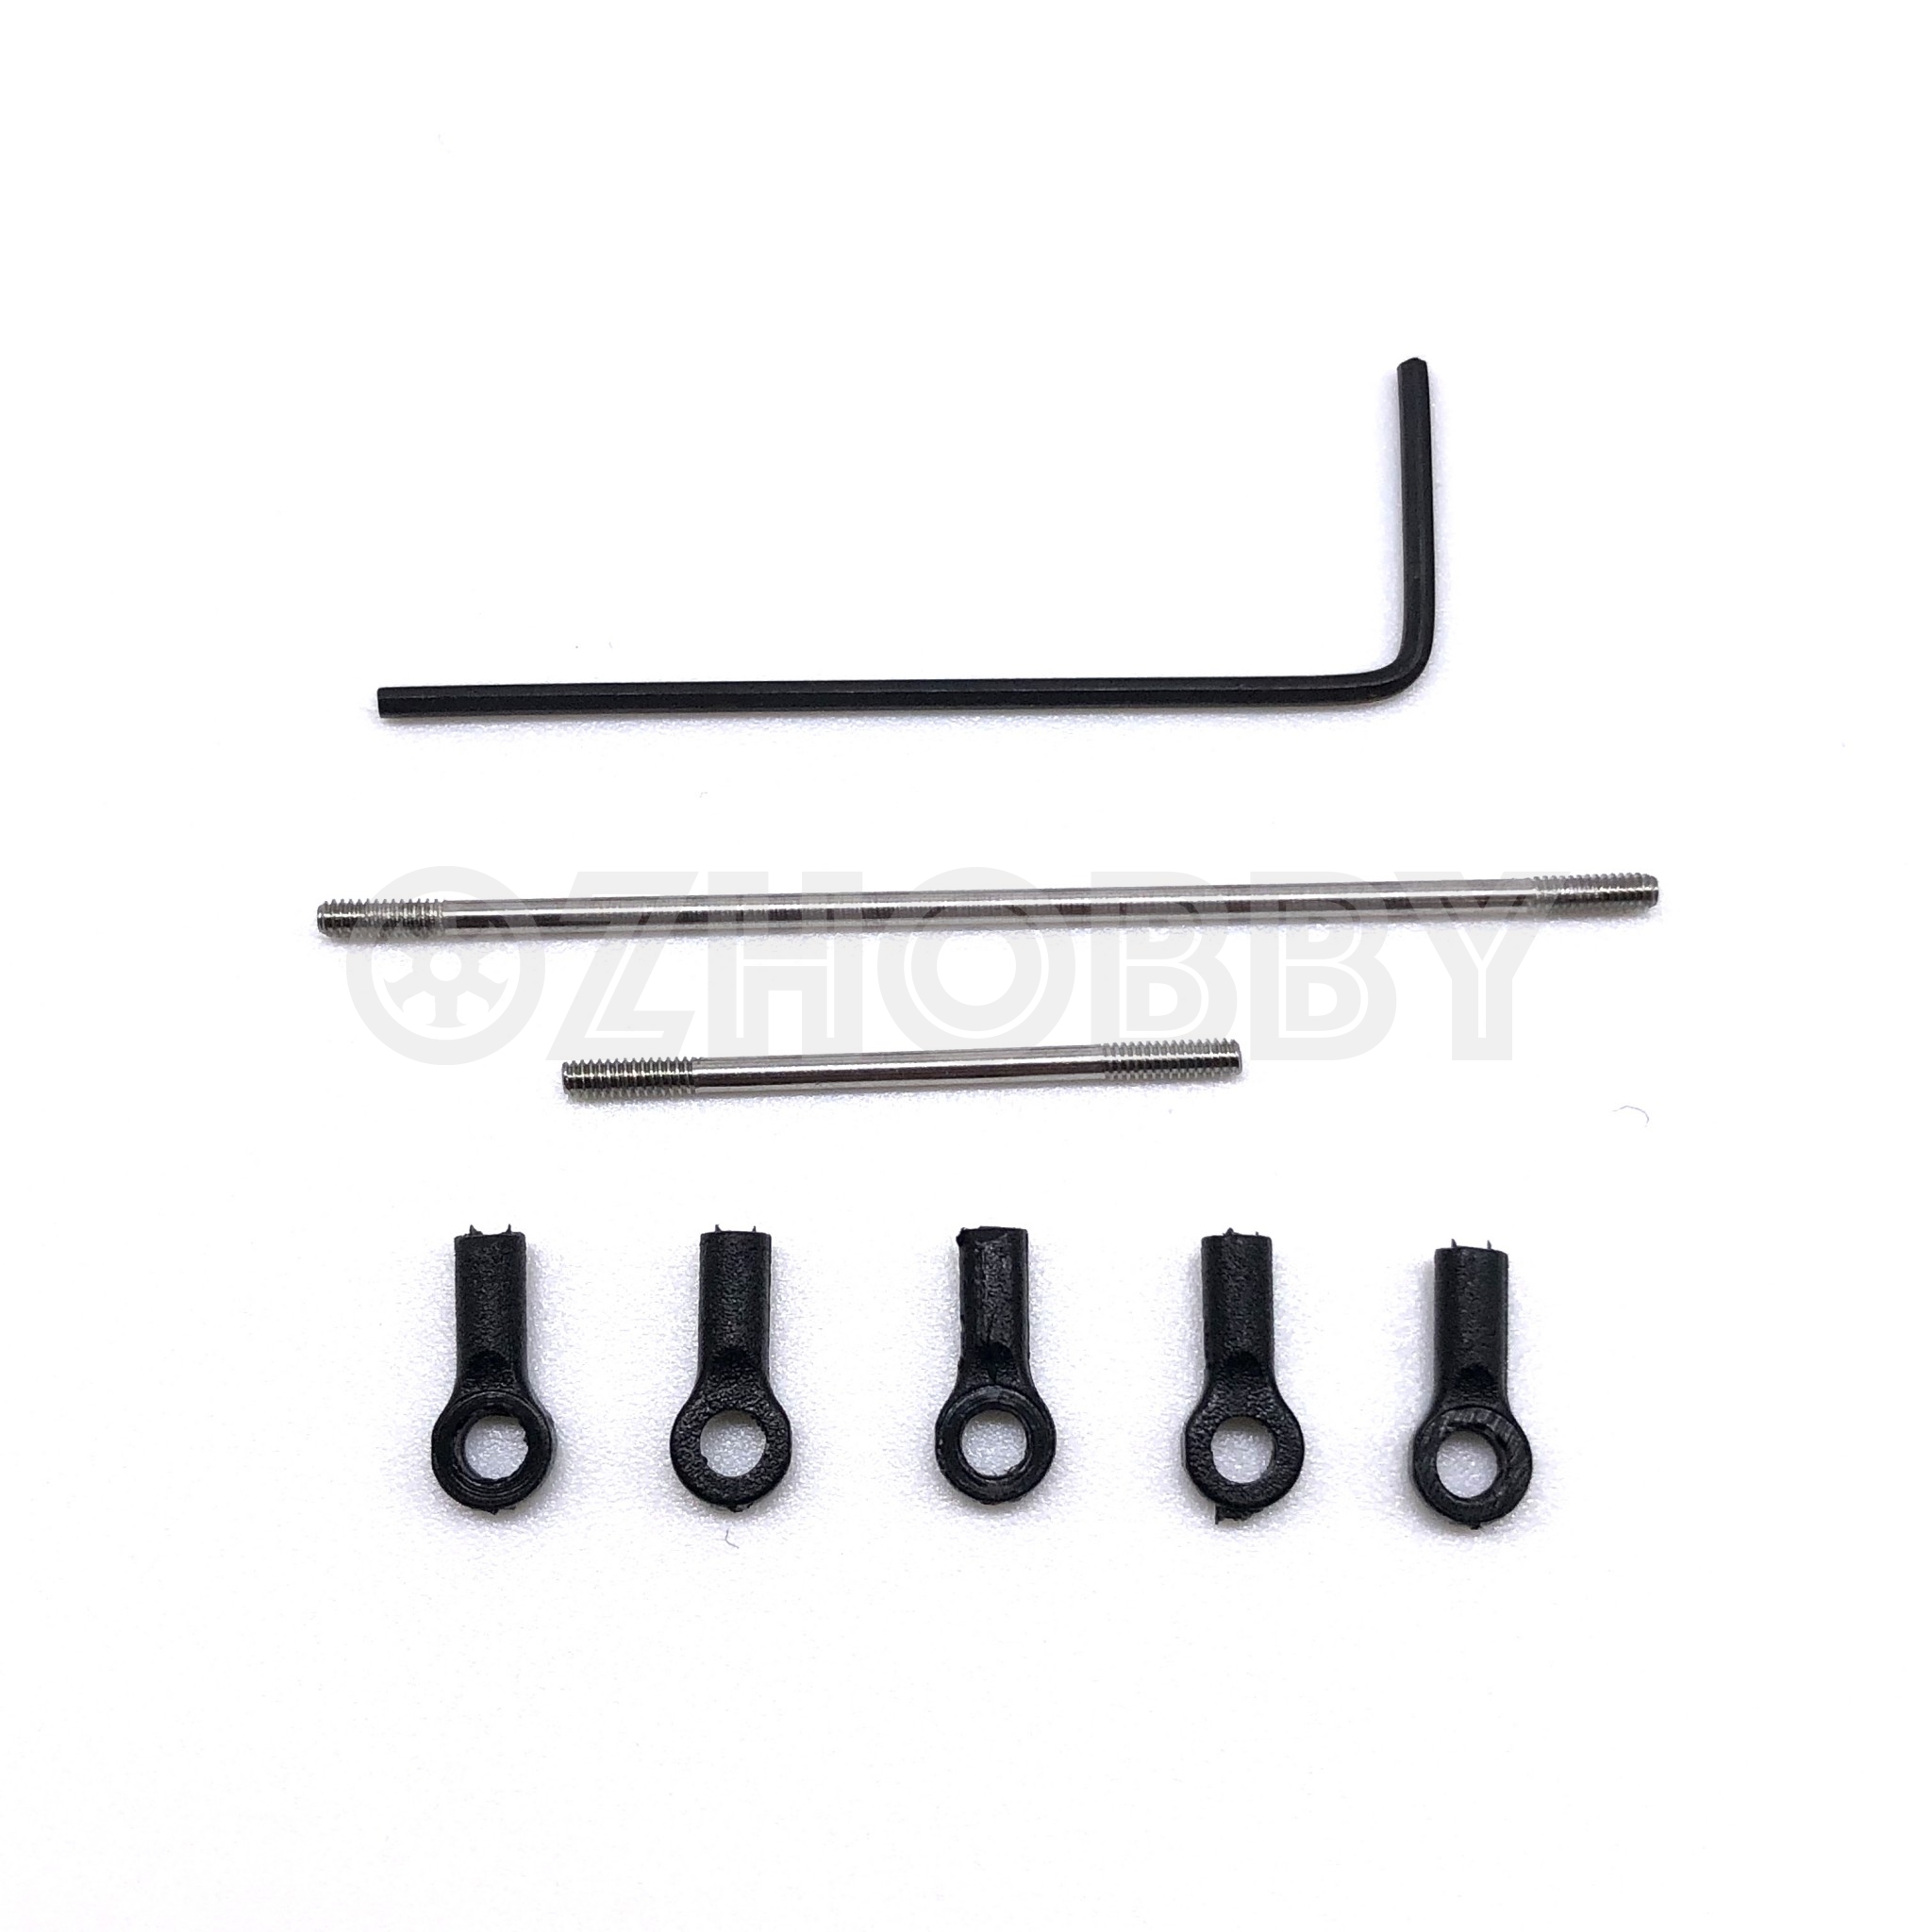 Orlandoo Hunter 1/35 OH35P01 55mm Complete Front and Rear Metal Axle Kit#MA2-550